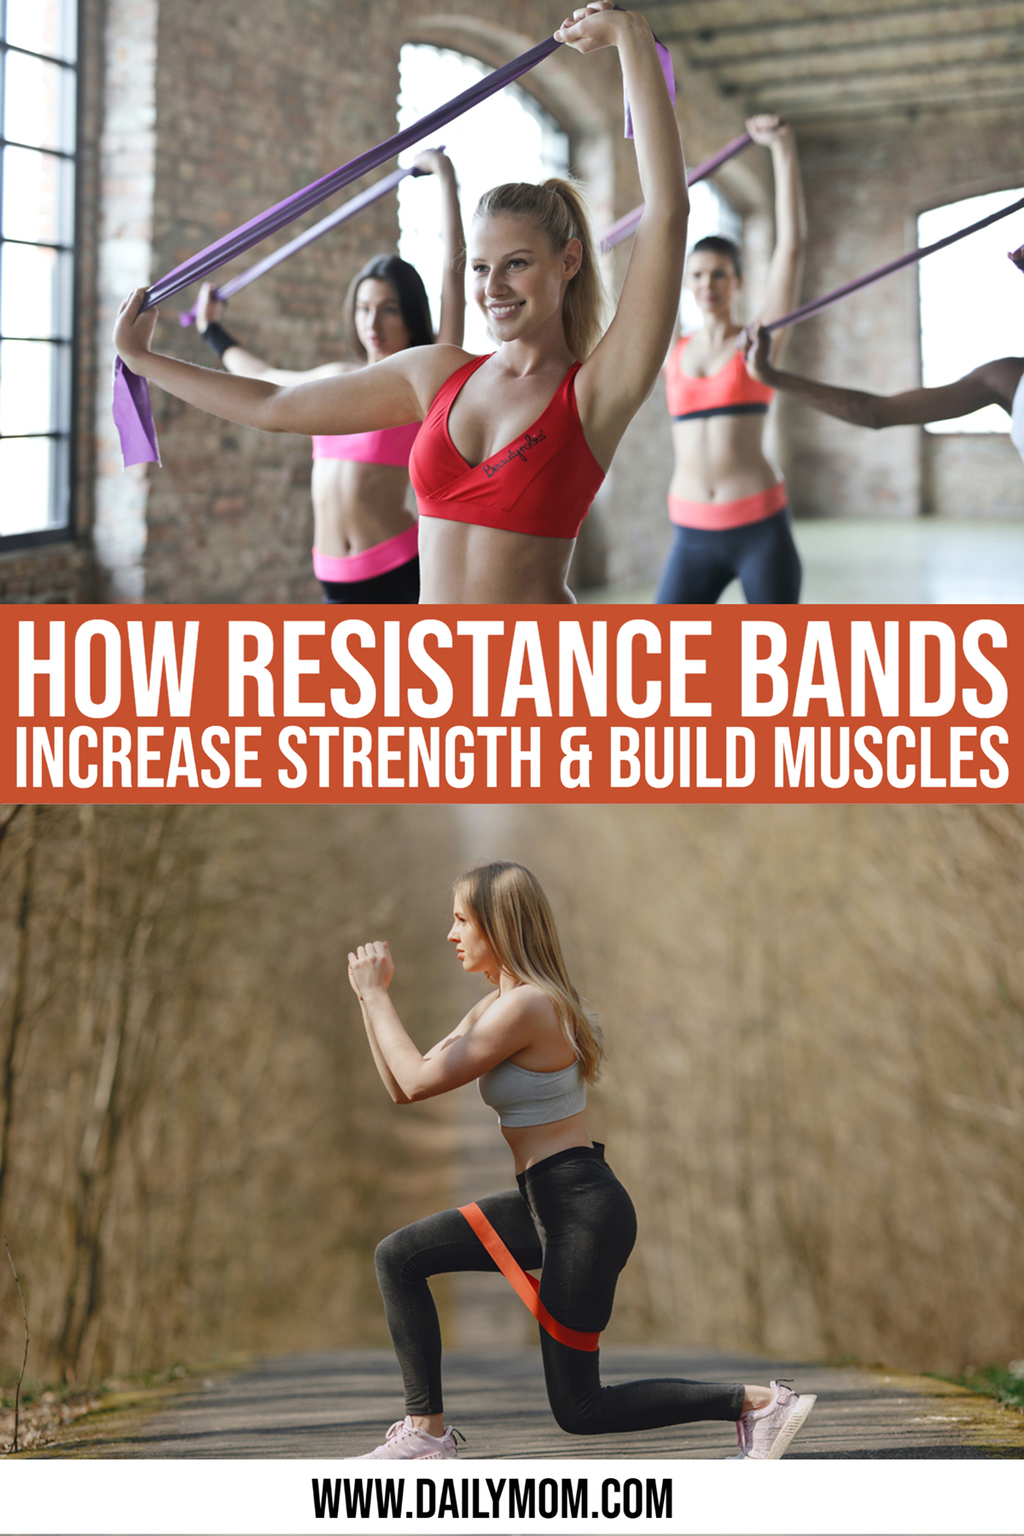 5 Excellent Resistance Bands To Help Improve Strength & Build Muscles For Amazing An New You